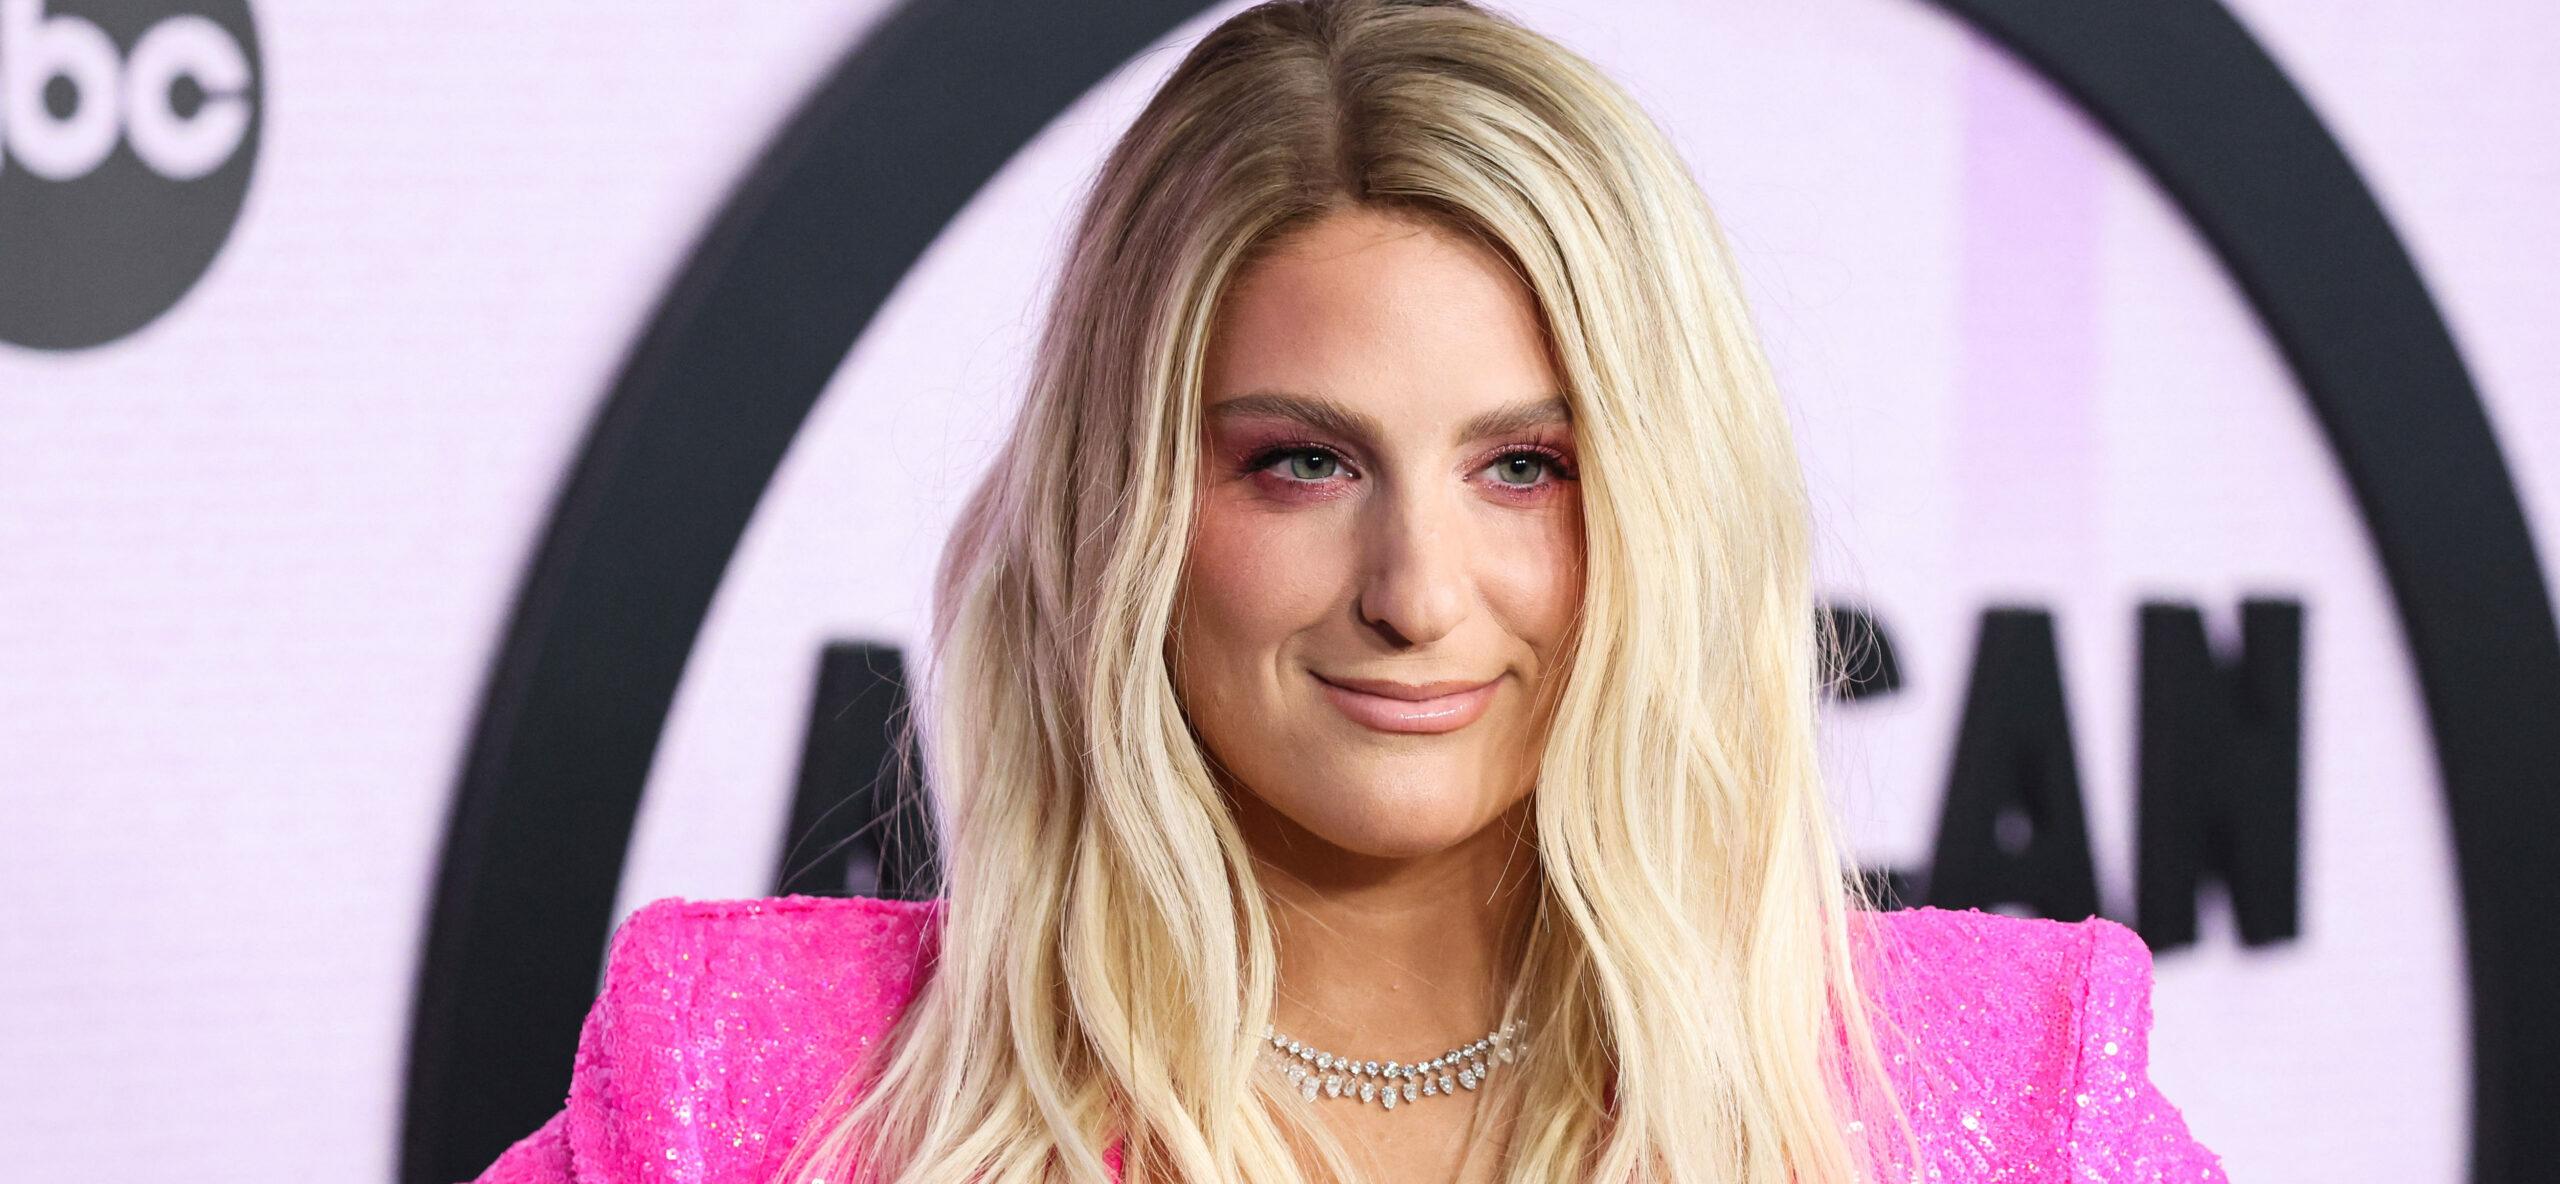 Meghan Trainor Shared The Emotional Moment She Found Out She’s Expecting Baby #2